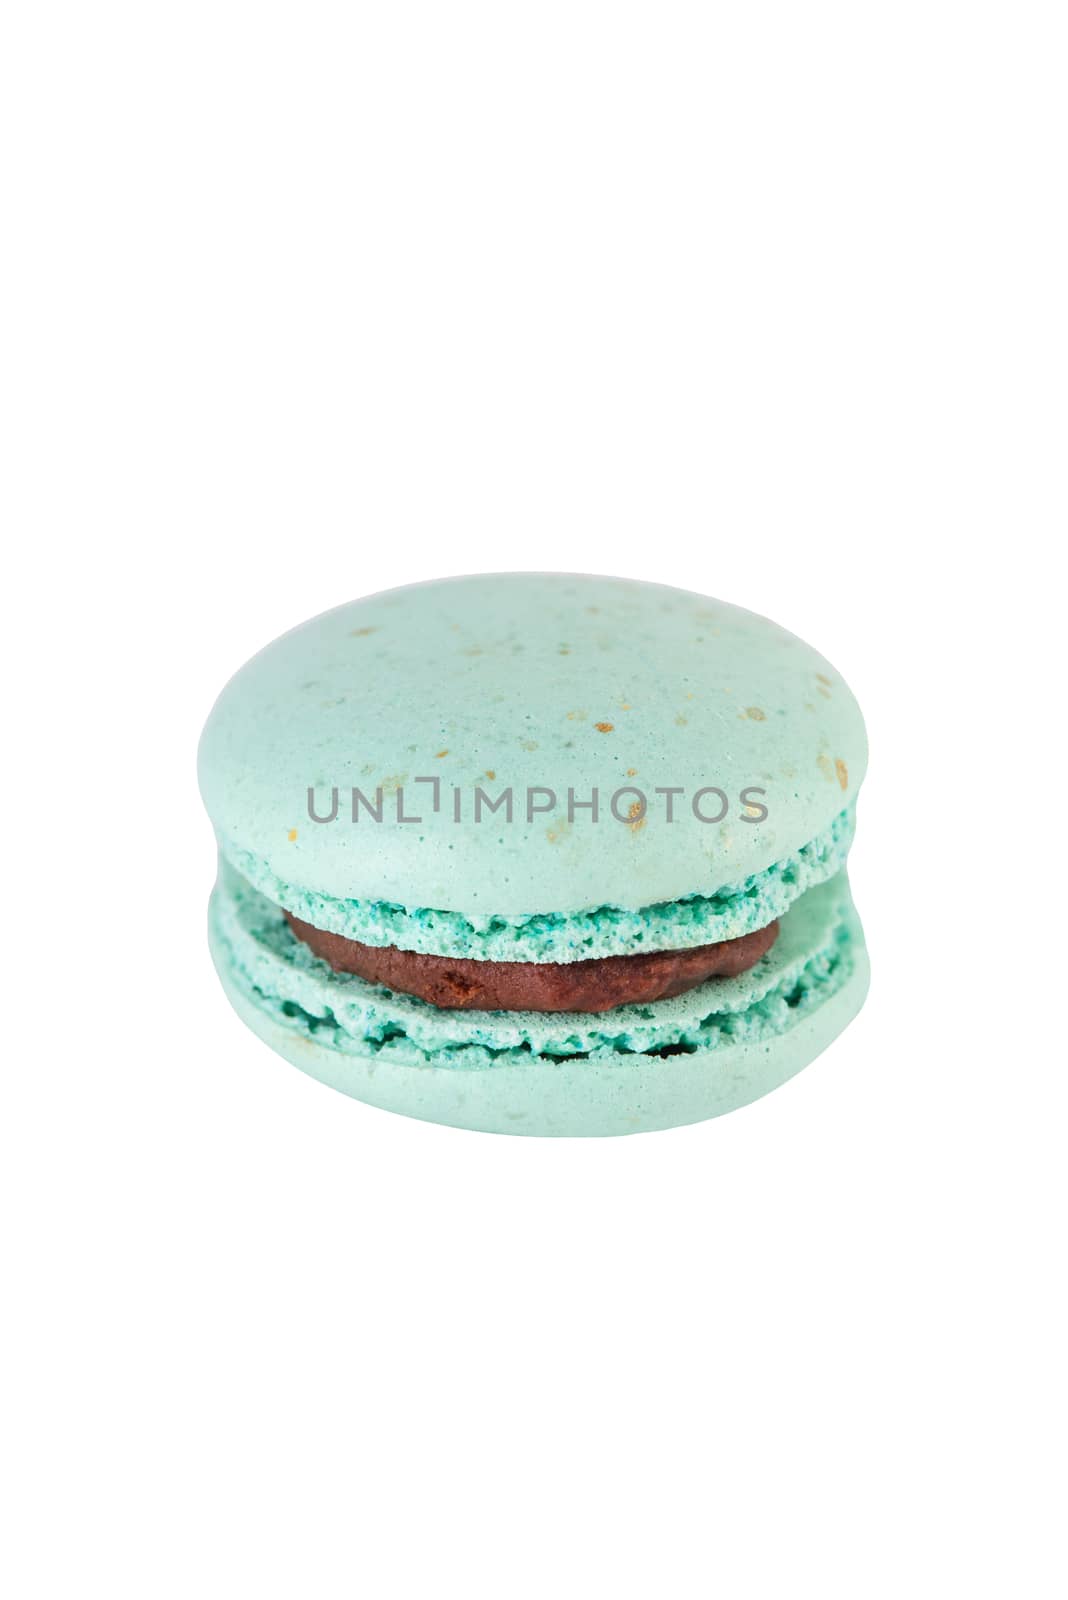 French Macaroon Cookie Isolated on White Background. Close Up Studio Photo.